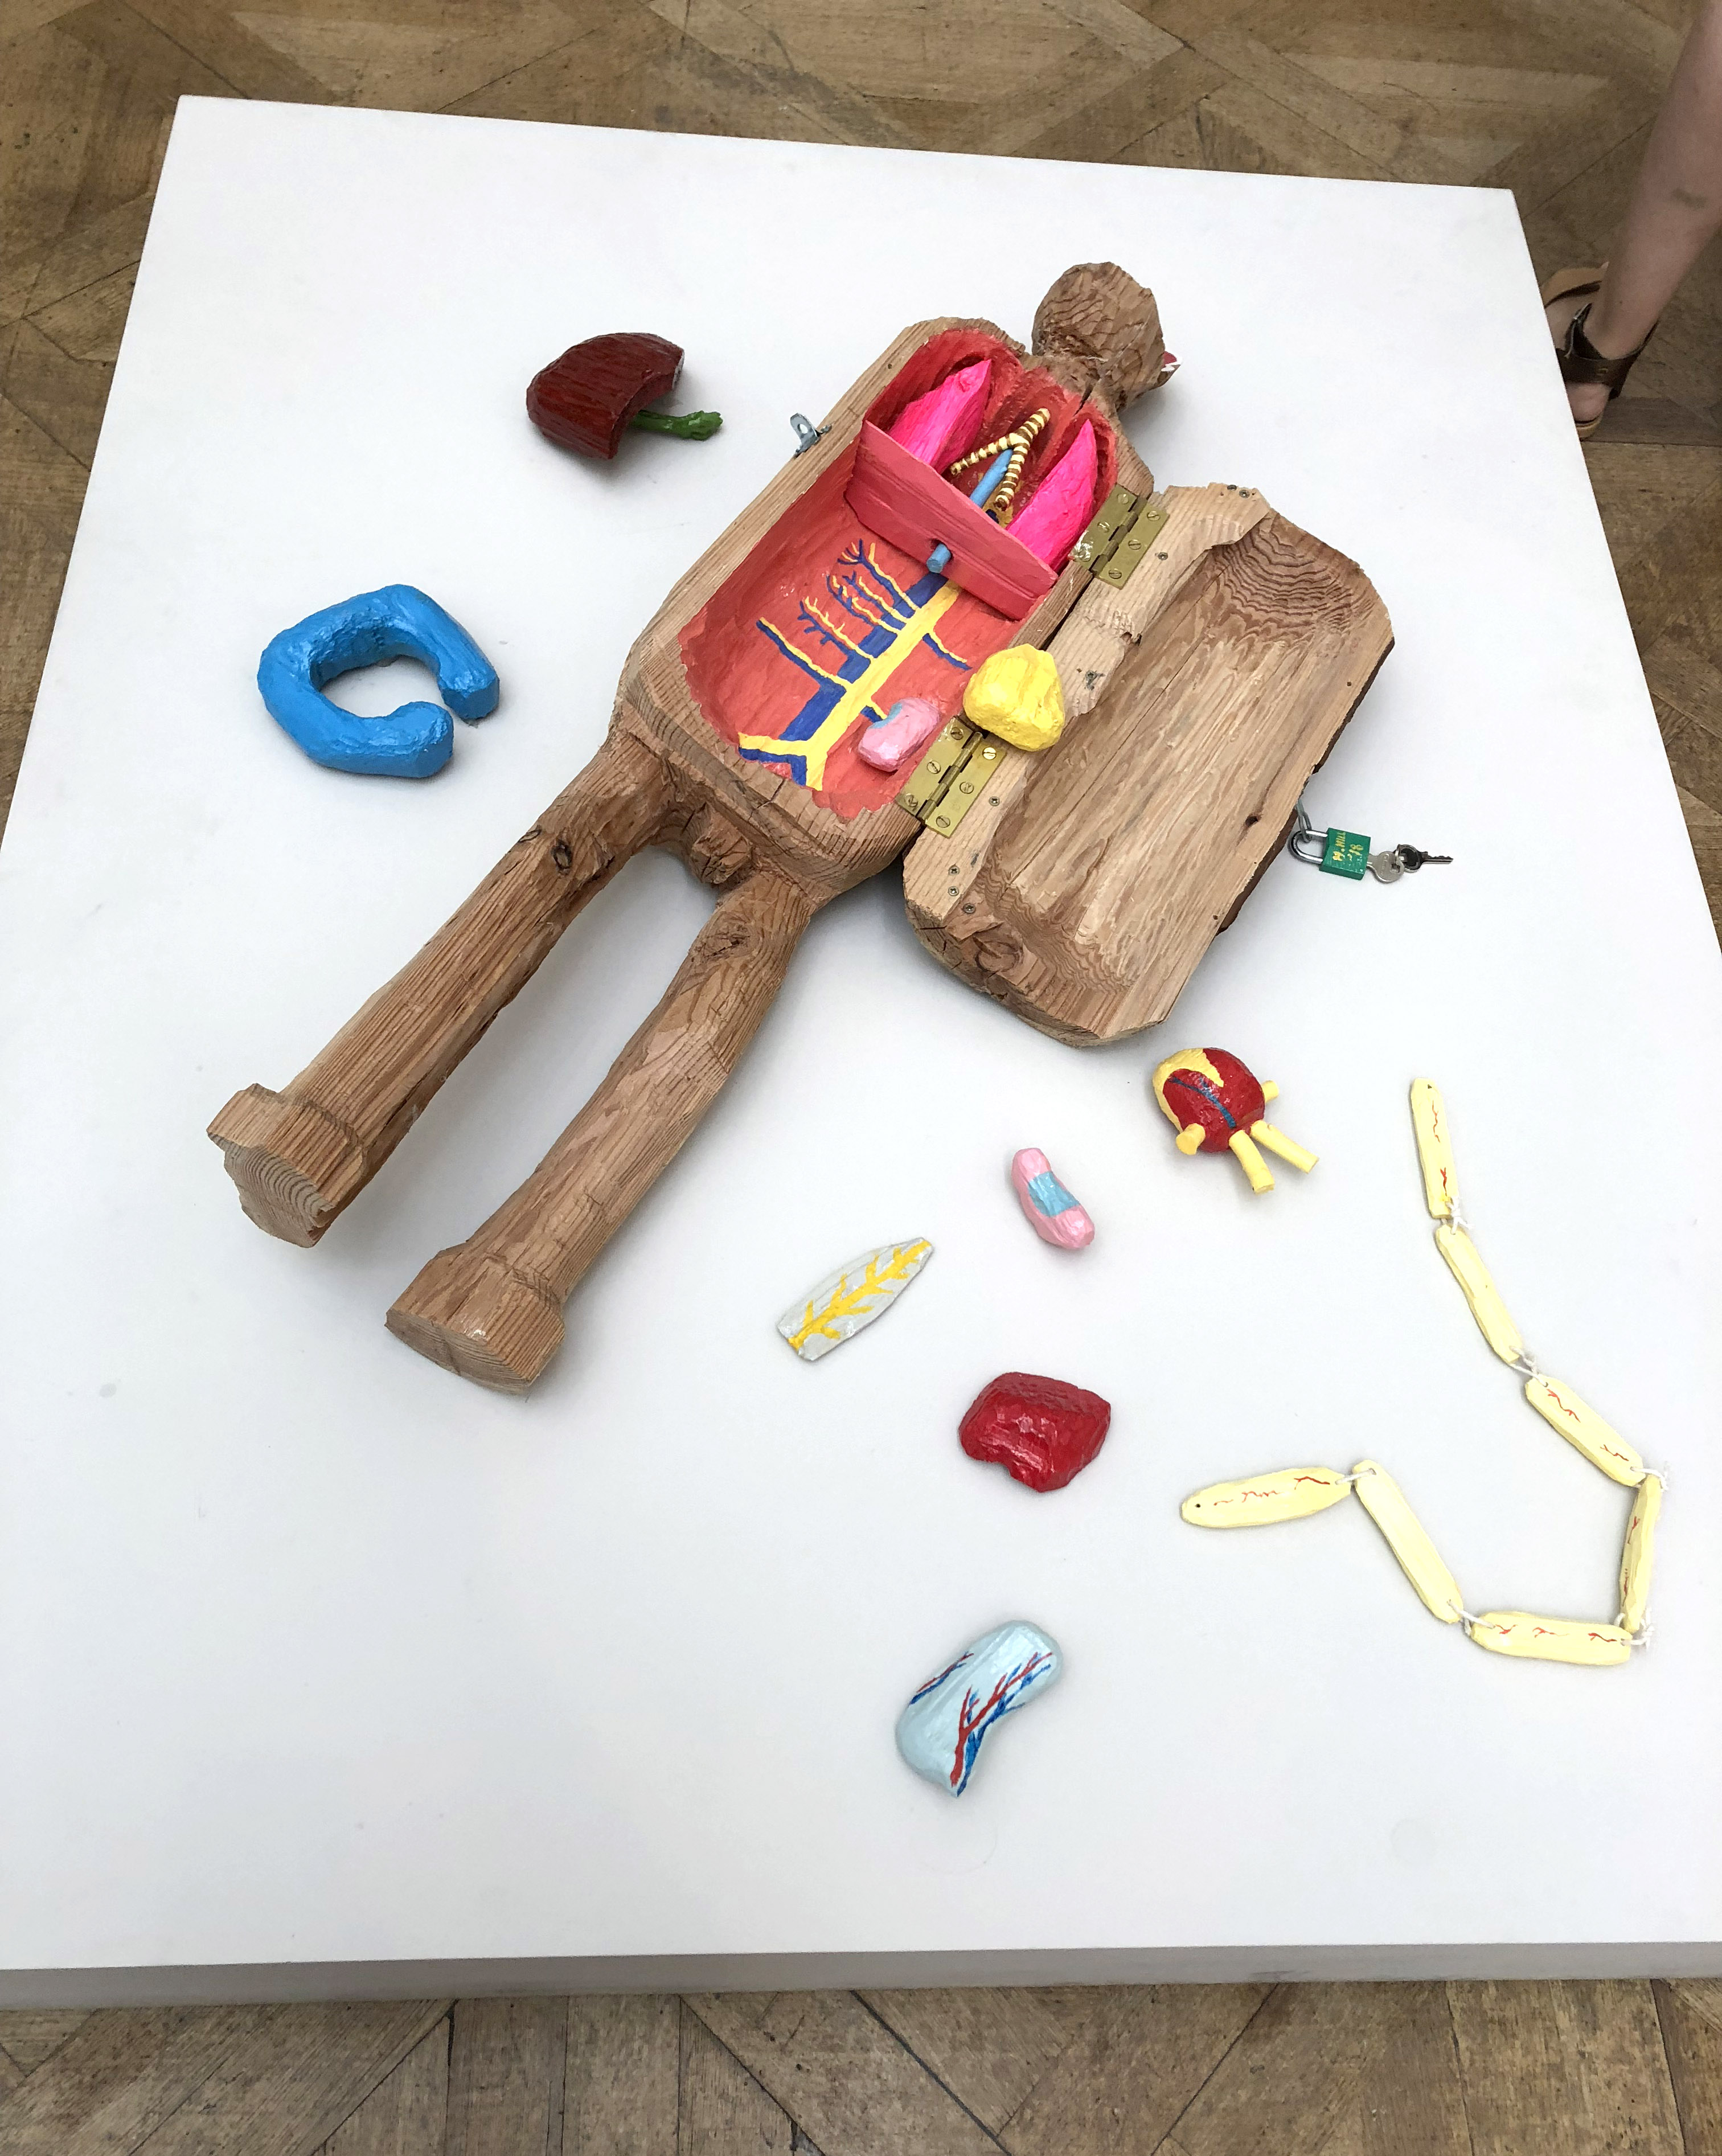 Royal Academy Summer Exhibition 2018 Operation Wooden Body